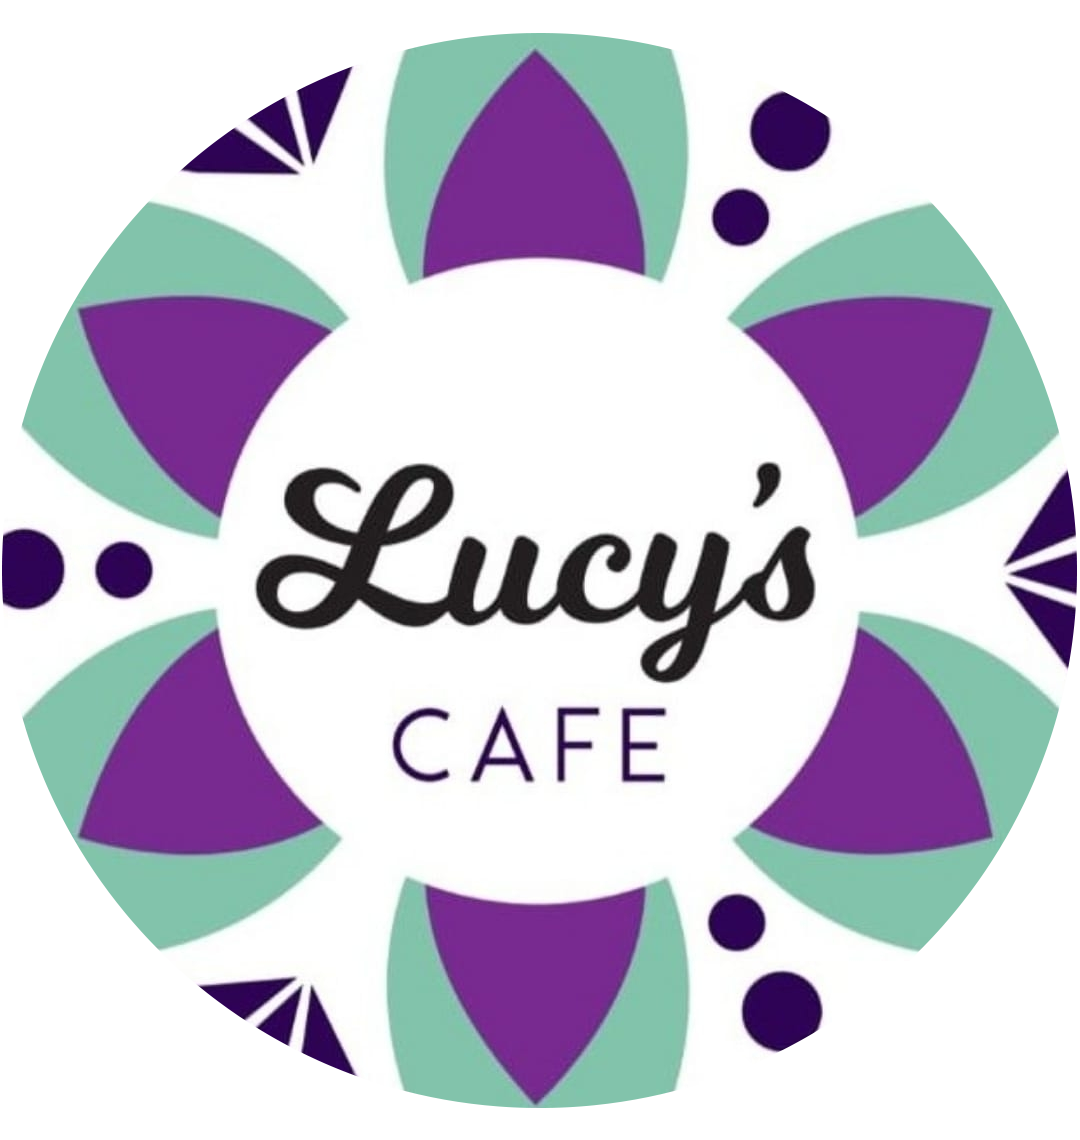 Lucy's Cafe logo scroll